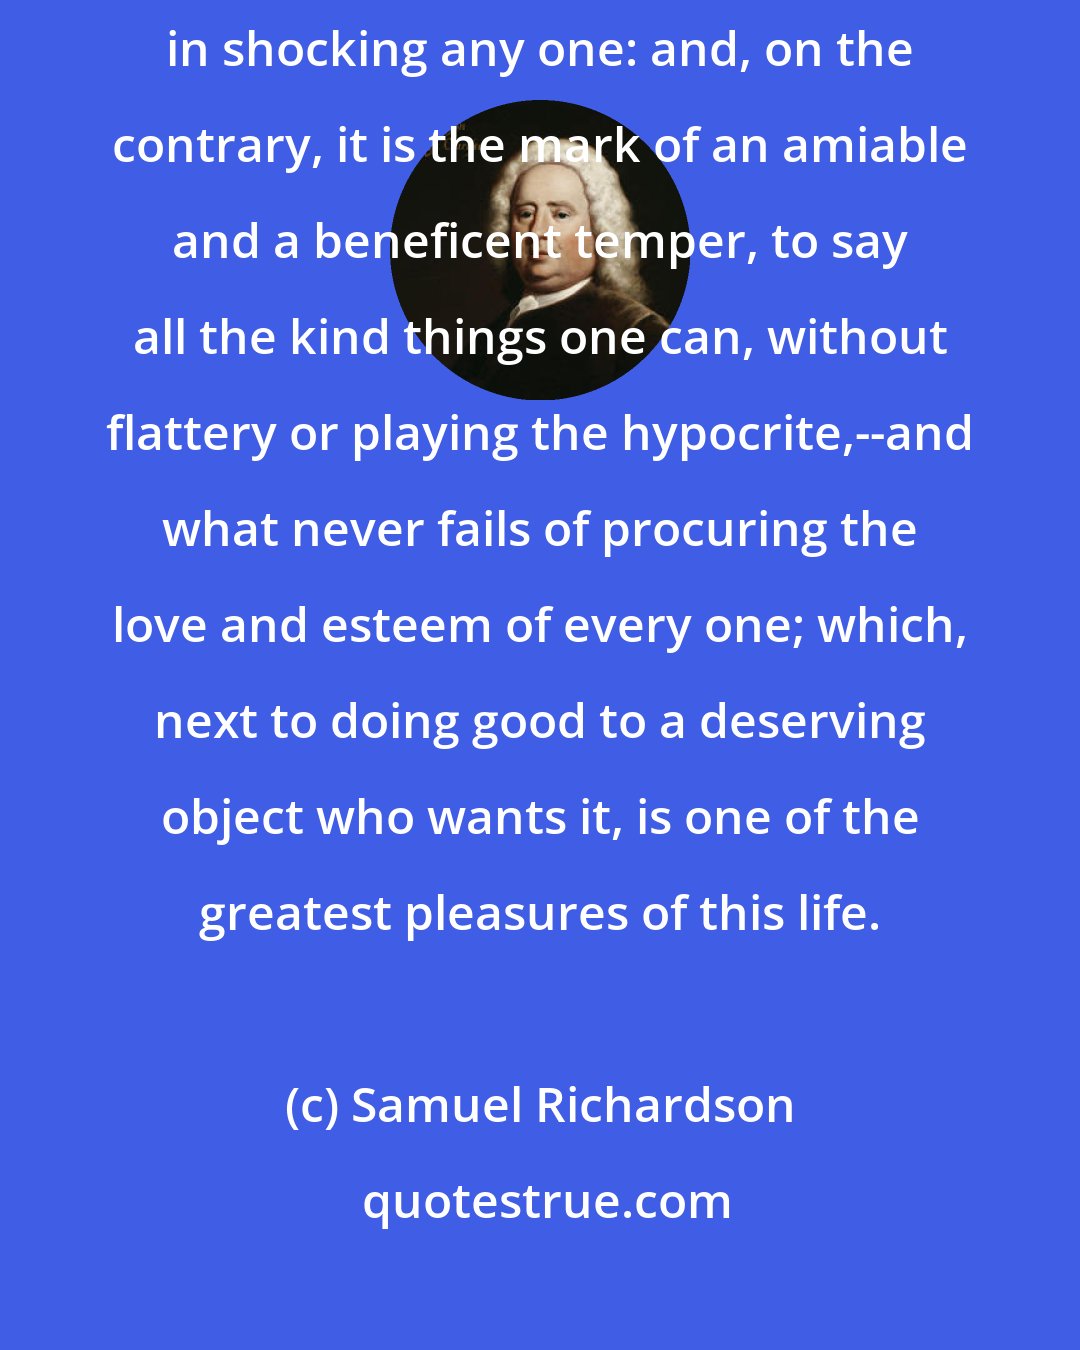 Samuel Richardson: Tis a barbarous temper, and a sign of a very ill nature, to take delight in shocking any one: and, on the contrary, it is the mark of an amiable and a beneficent temper, to say all the kind things one can, without flattery or playing the hypocrite,--and what never fails of procuring the love and esteem of every one; which, next to doing good to a deserving object who wants it, is one of the greatest pleasures of this life.